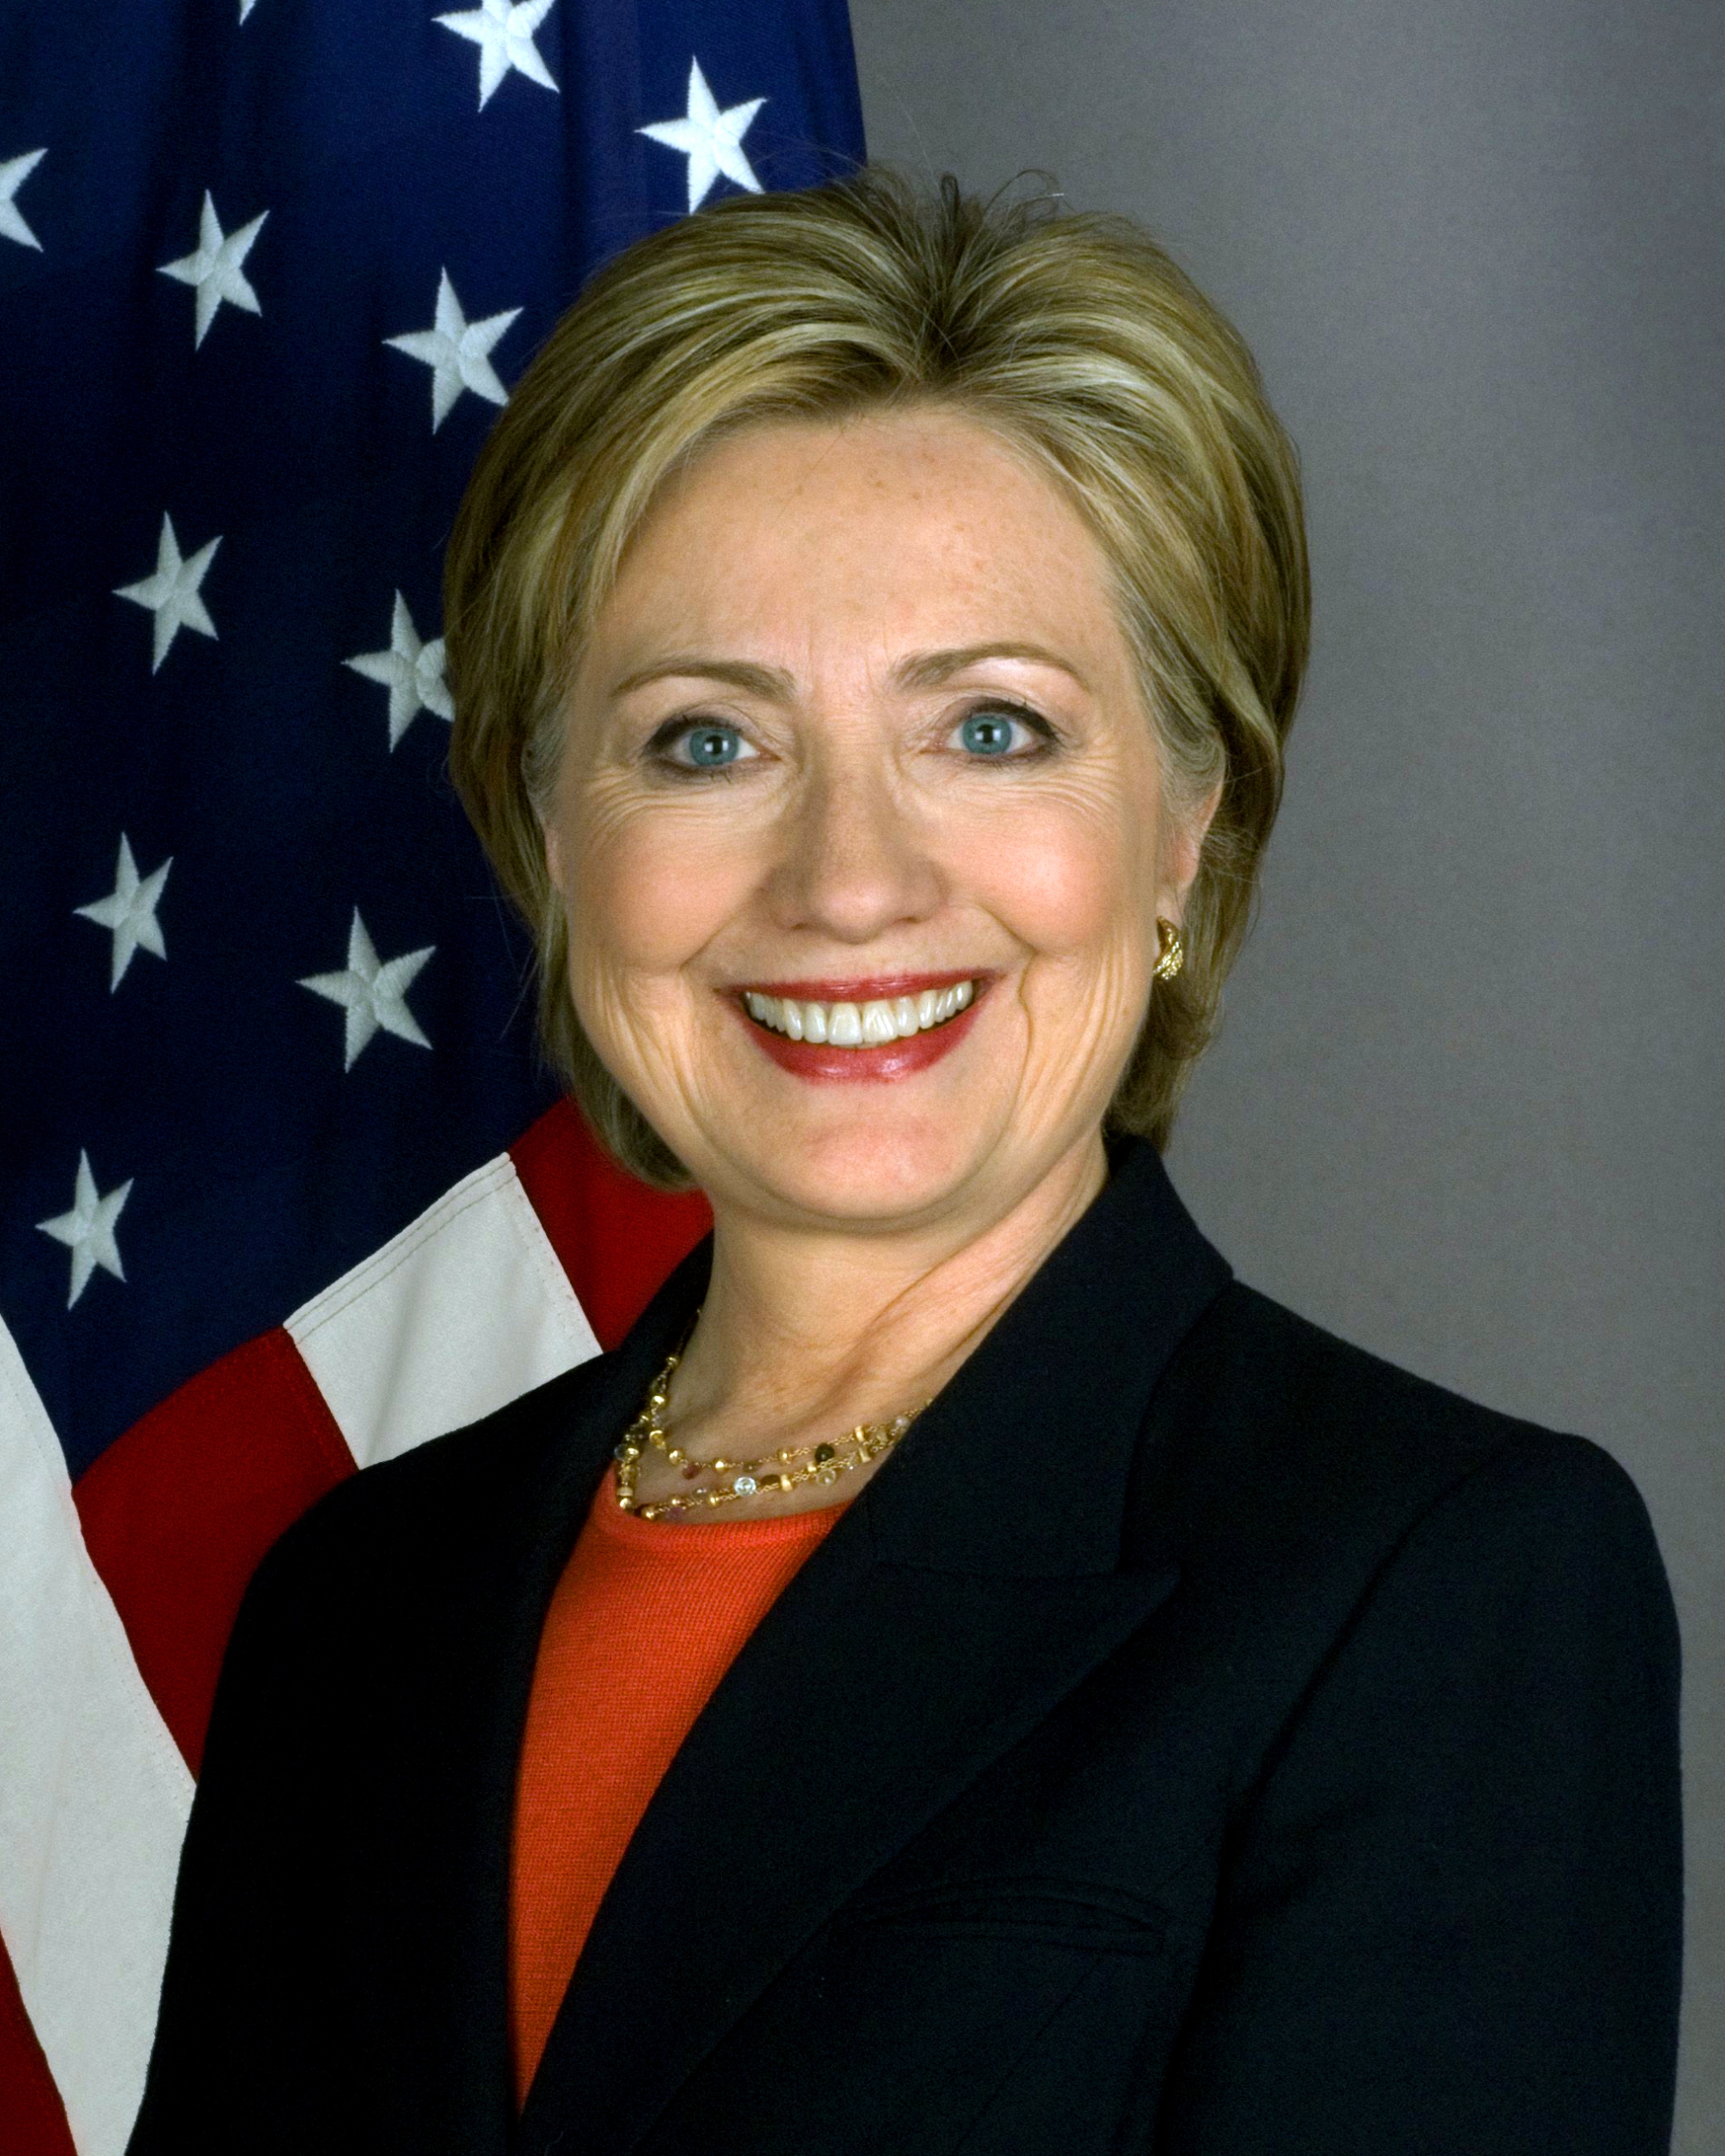 Hillary Clinton in a black sport coat with a red dress shirt underneath, with the United States flag in the background.